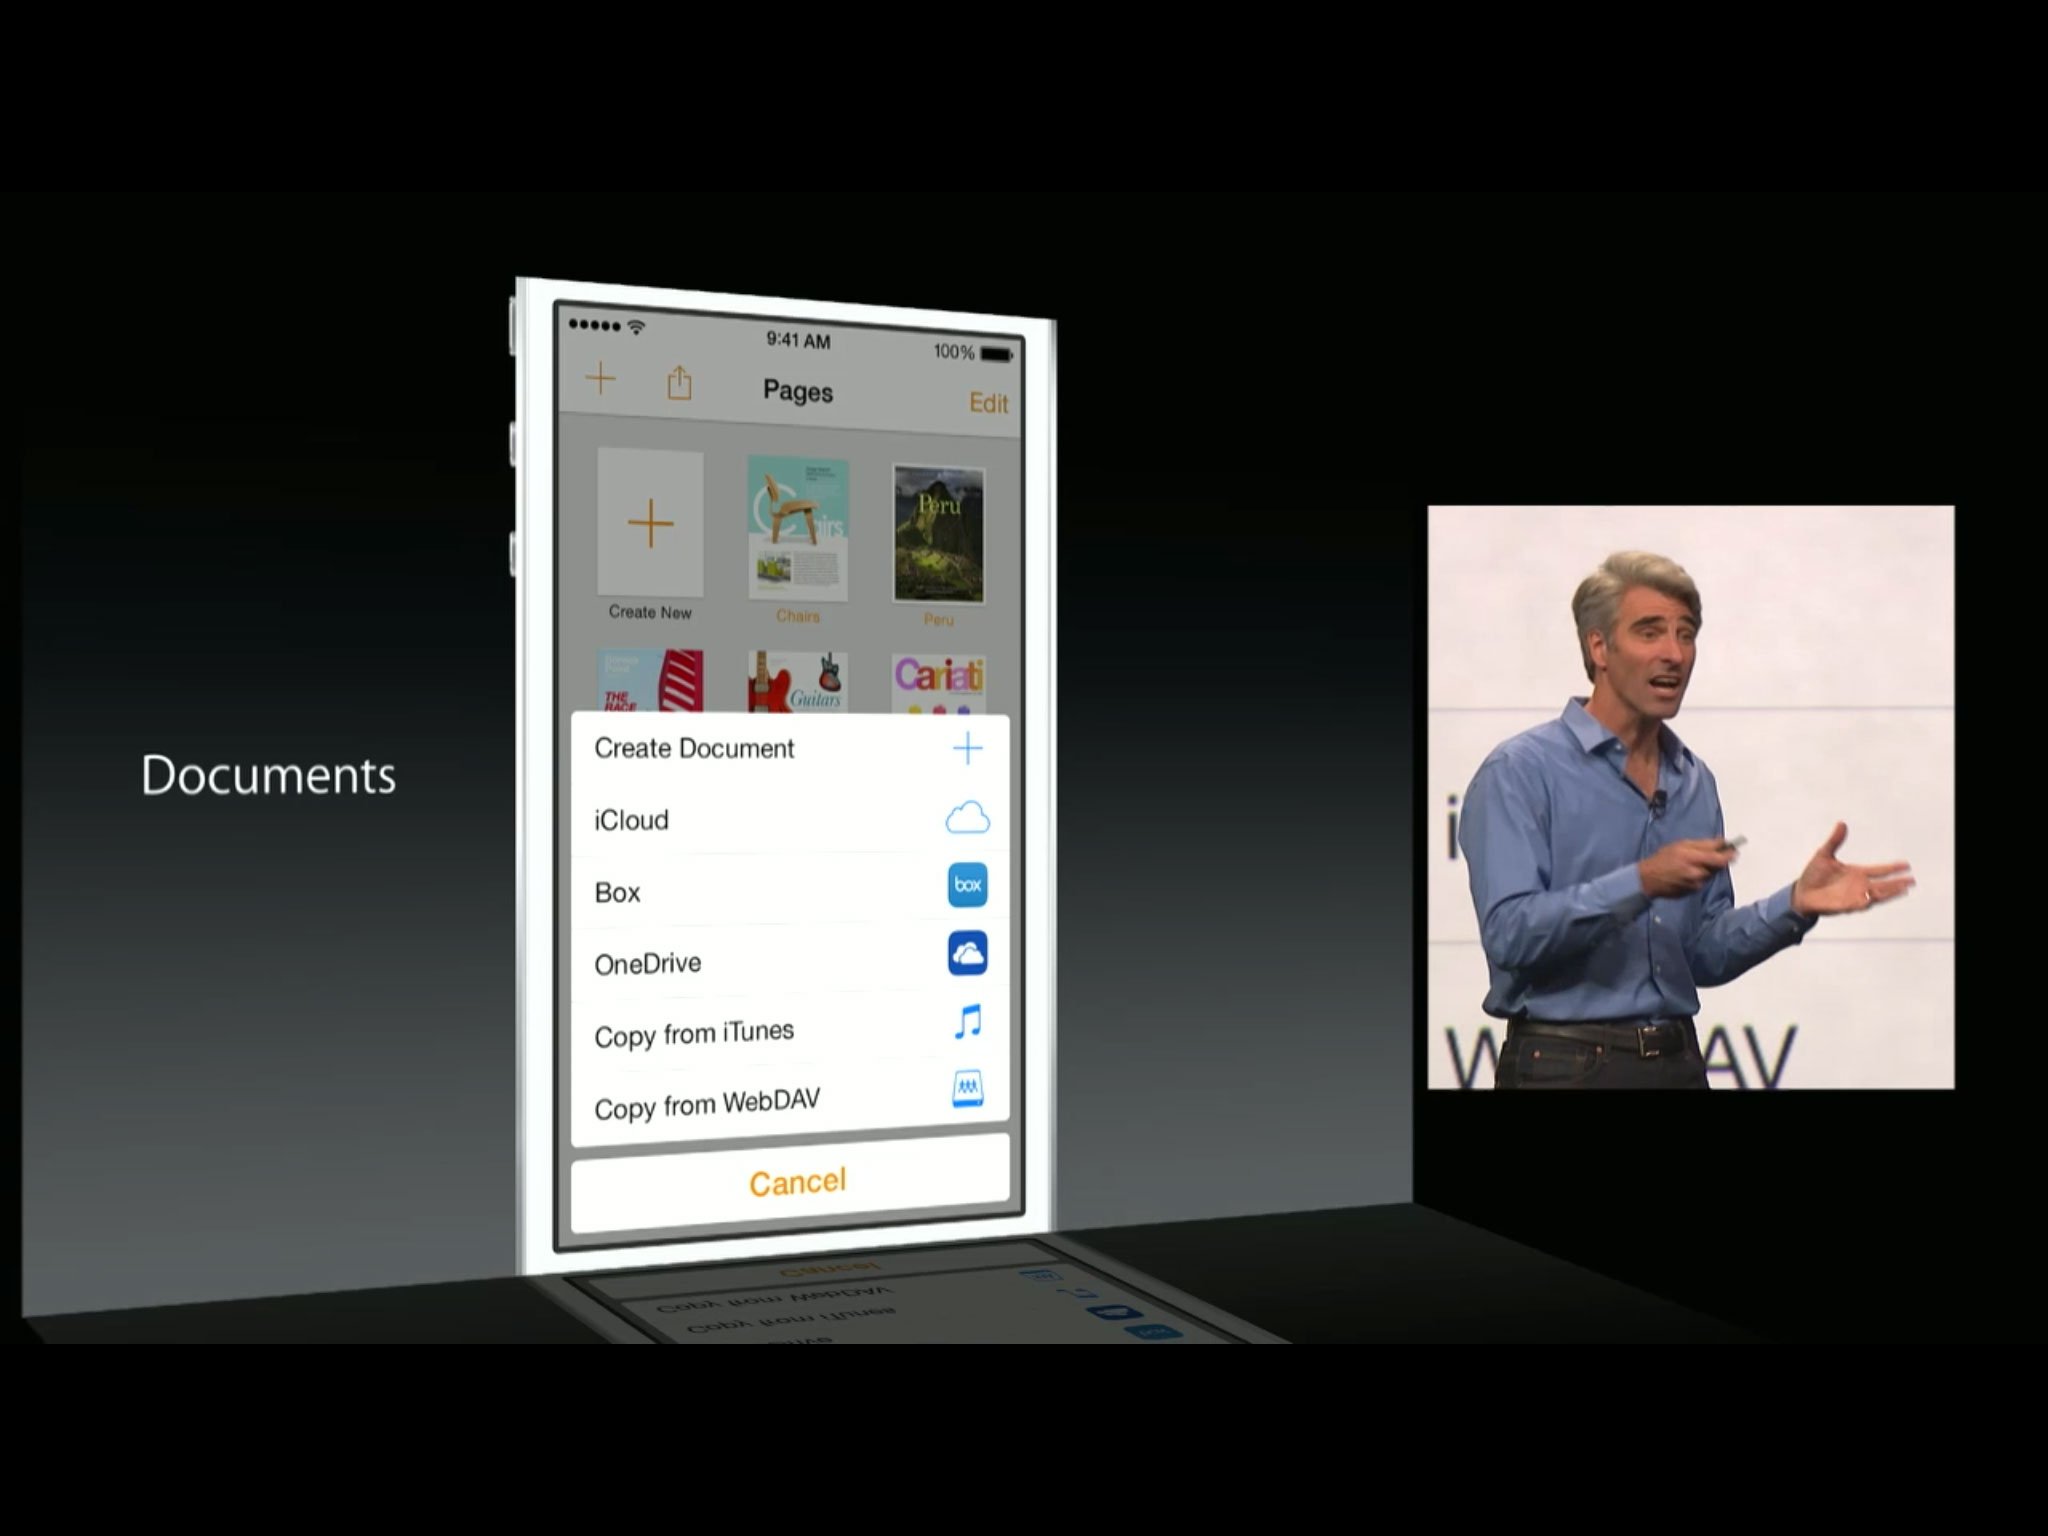 iOS 8 document provider extensions: Explained